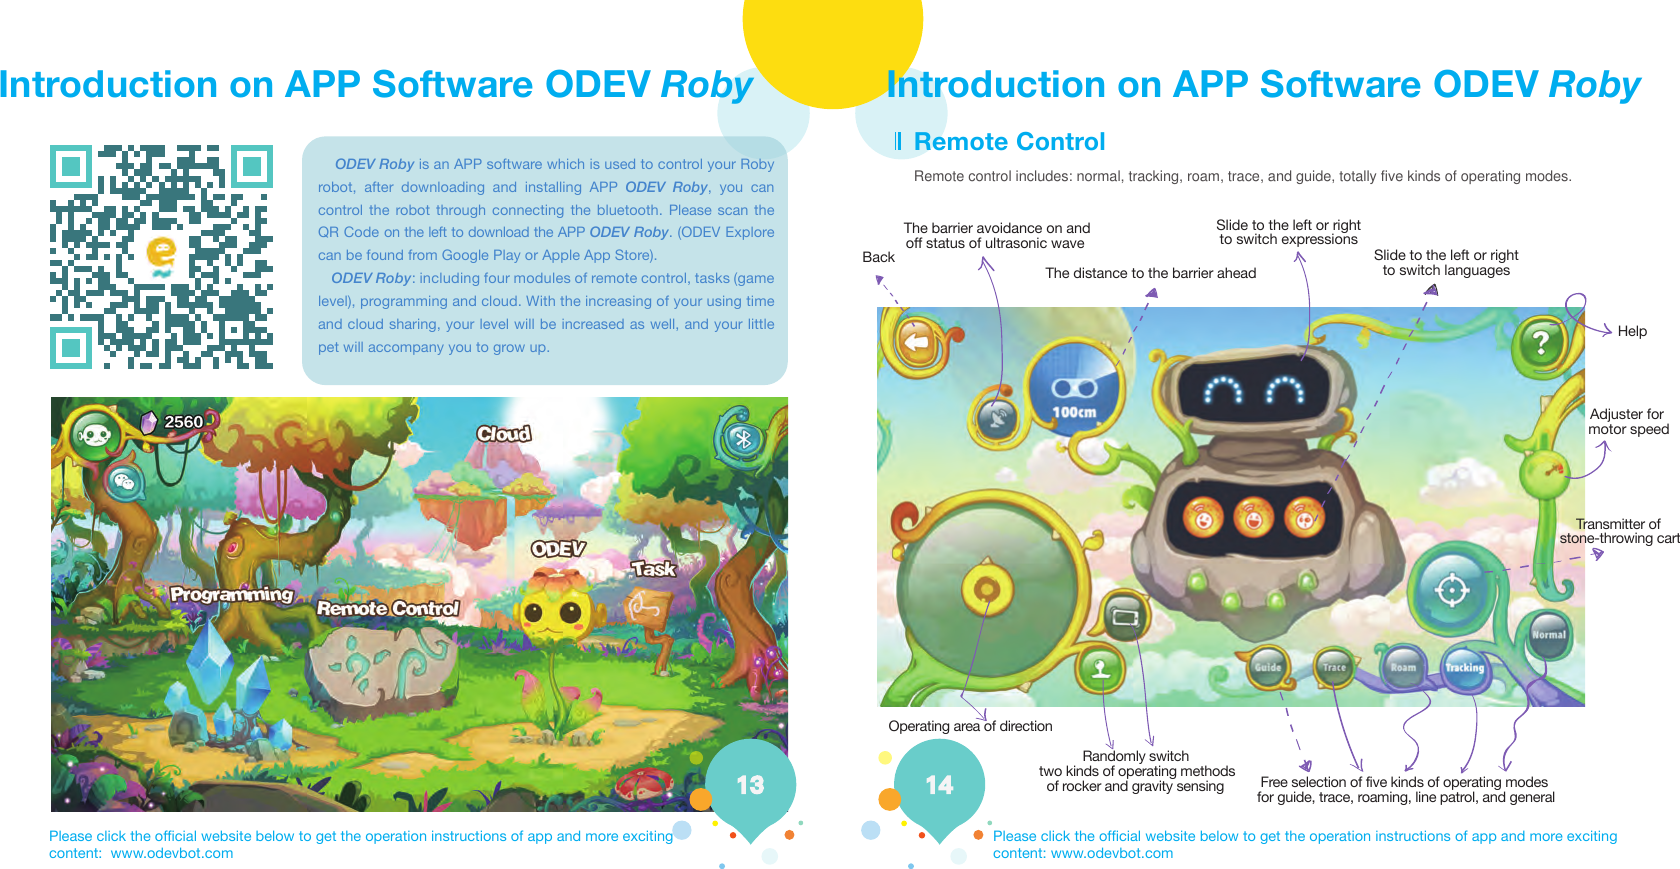 Introduction on APP Software ODEV Roby Introduction on APP Software ODEV RobyRemote control includes: normal, tracking, roam, trace, and guide, totally five kinds of operating modes.    ODEV Roby is an APP software which is used to control your Roby robot, after downloading and installing APP ODEV Roby, you can control the robot through connecting the bluetooth. Please scan the QR Code on the left to download the APP ODEV Roby. (ODEV Explore can be found from Google Play or Apple App Store).    ODEV Roby: including four modules of remote control, tasks (game level), programming and cloud. With the increasing of your using time and cloud sharing, your level will be increased as well, and your little pet will accompany you to grow up.Please click the official website below to get the operation instructions of app and more exciting content:  www.odevbot.comPlease click the official website below to get the operation instructions of app and more exciting content: www.odevbot.comRemote ControlBackThe barrier avoidance on andoff status of ultrasonic wave The distance to the barrier aheadSlide to the left or rightto switch expressionsSlide to the left or rightto switch languagesHelpAdjuster for motor speedTransmitter of stone-throwing cartOperating area of directionRandomly switch  Free selection of five kinds of operating modes for guide, trace, roaming, line patrol, and general  two kinds of operating methods of rocker and gravity sensing